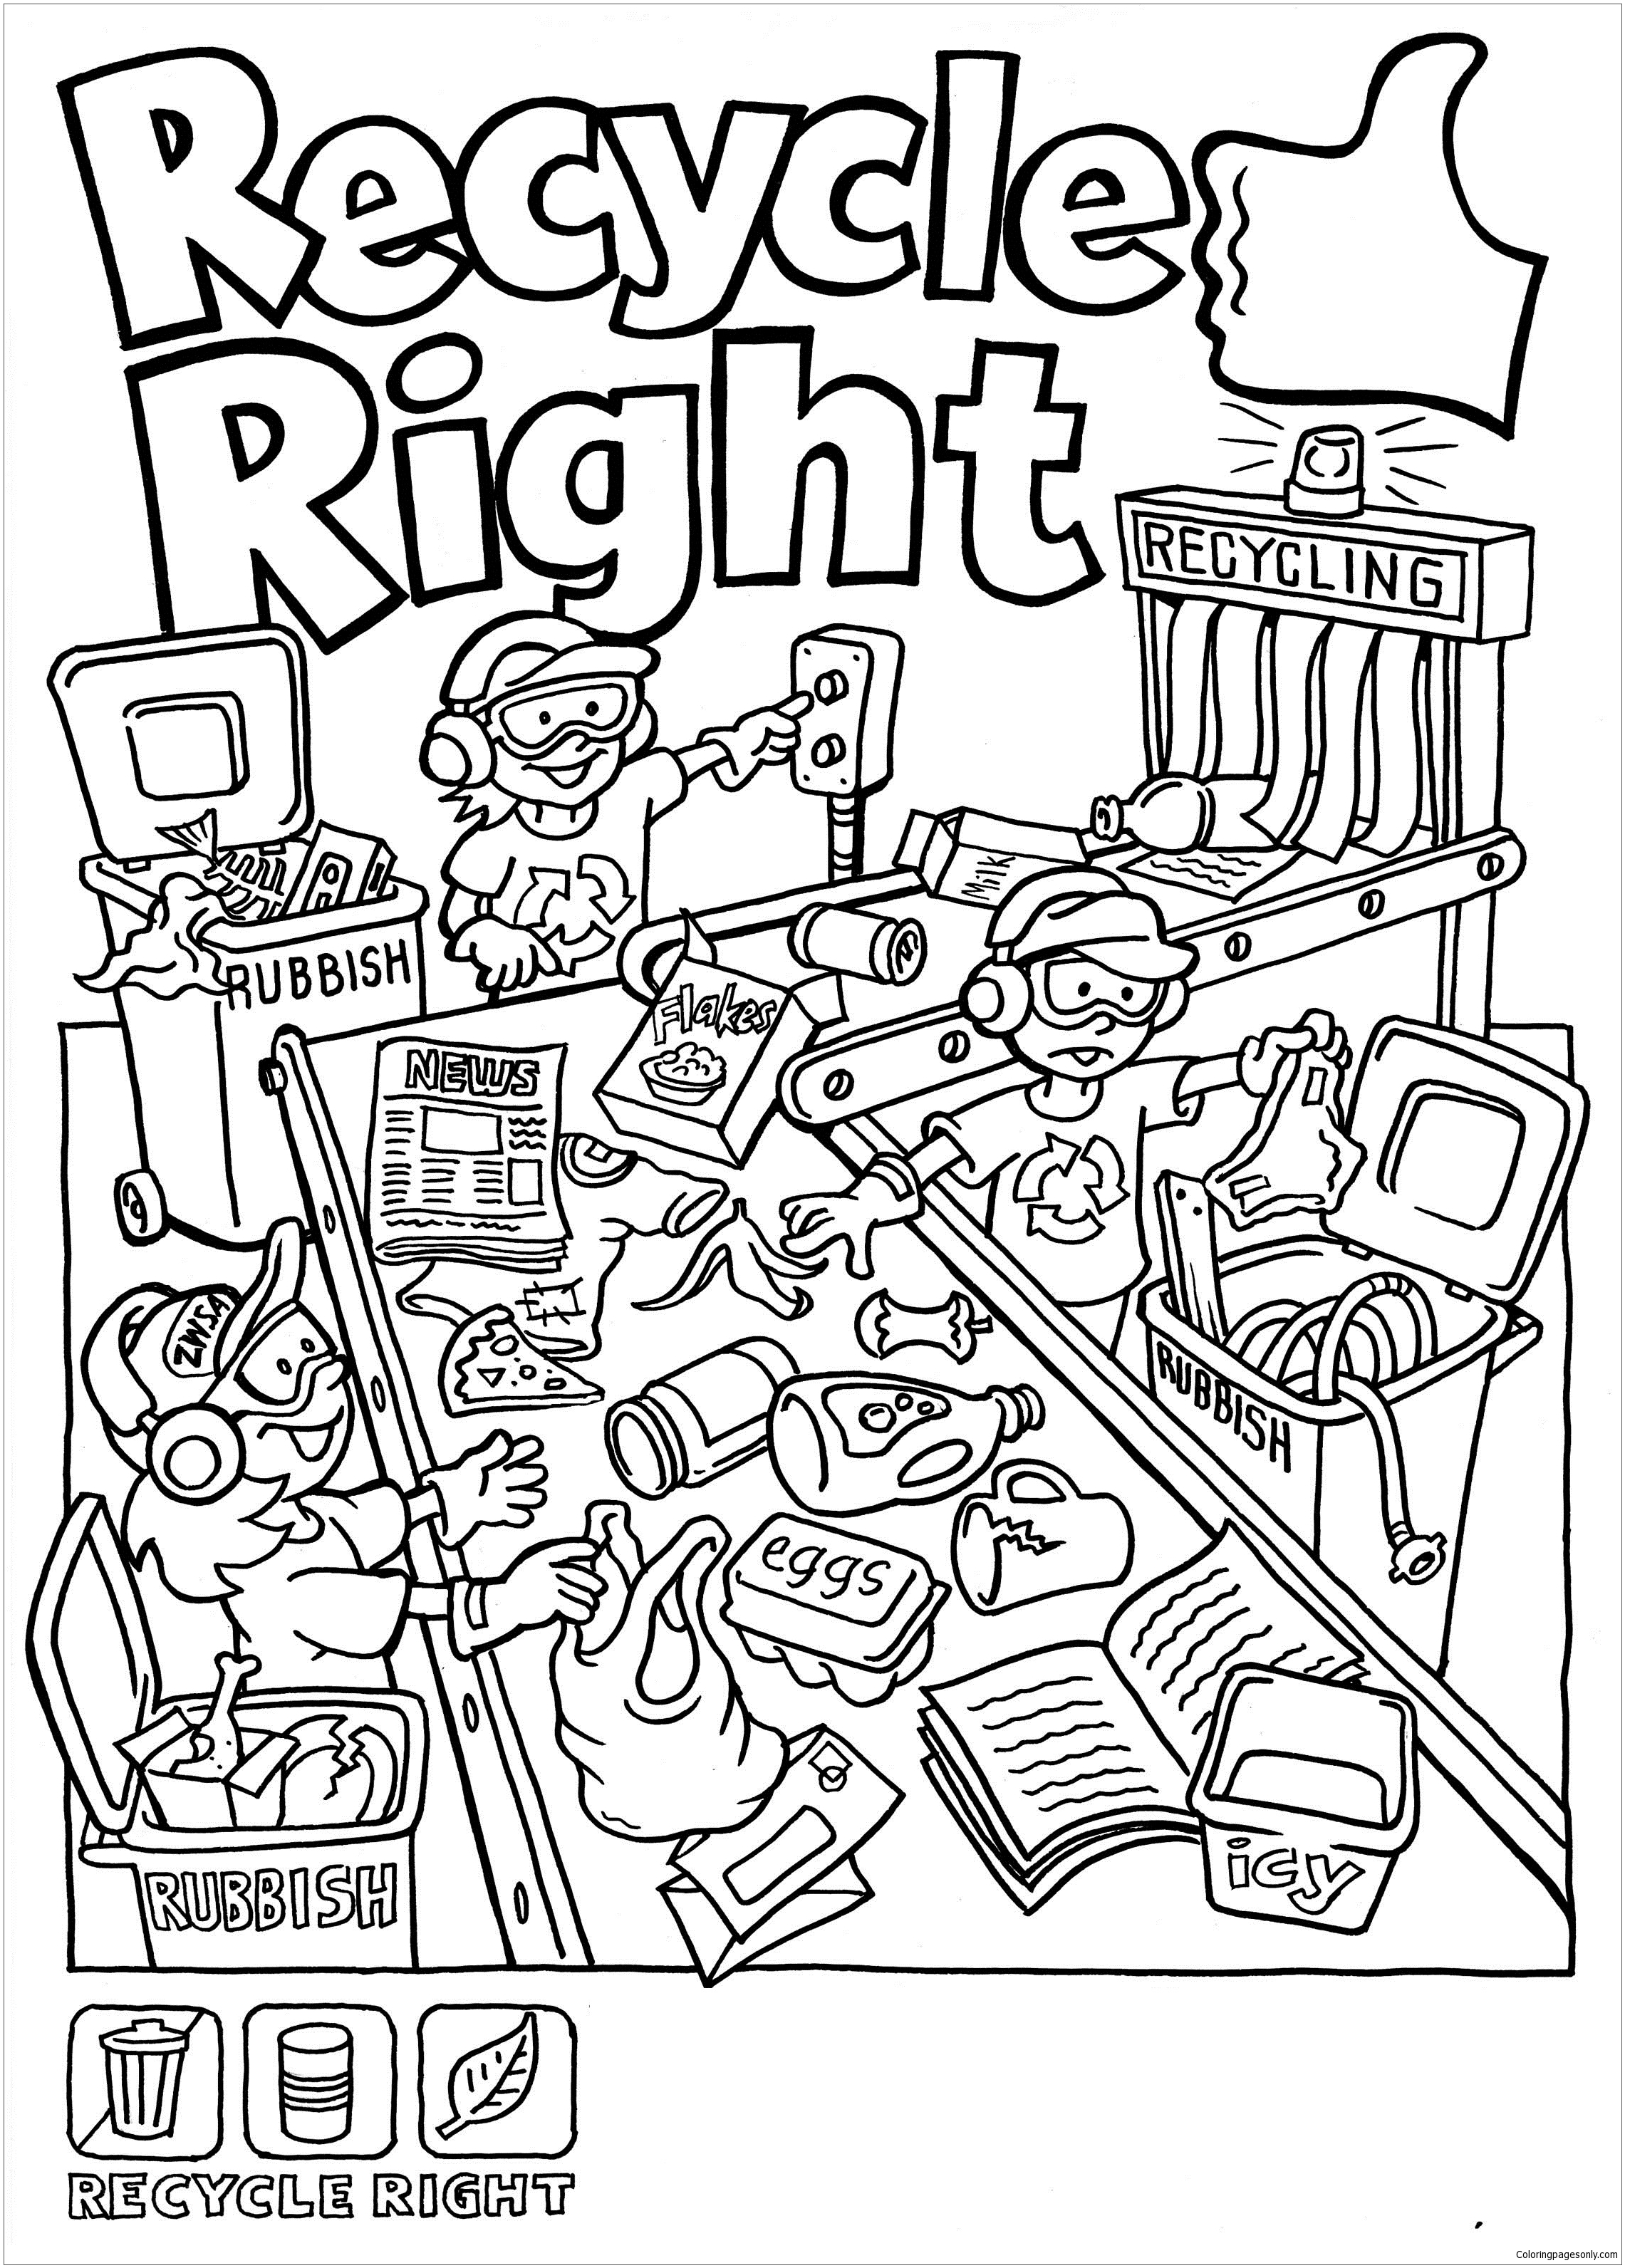 Recycle Right Coloring Pages Nature & Seasons Coloring Pages